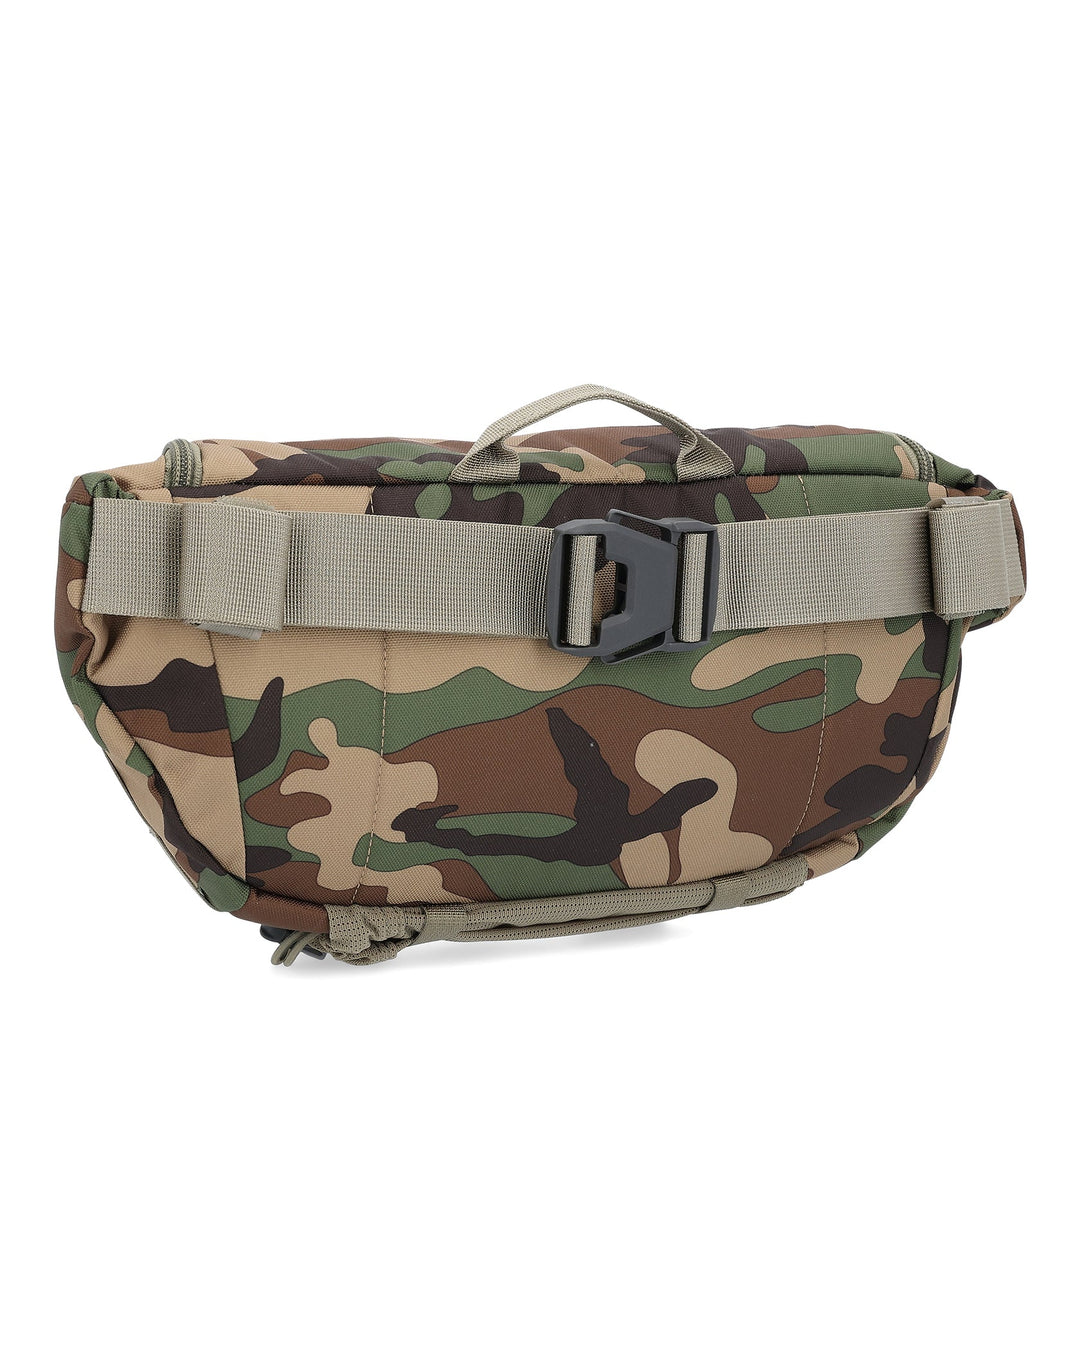 Simms Tributary Hip Pack